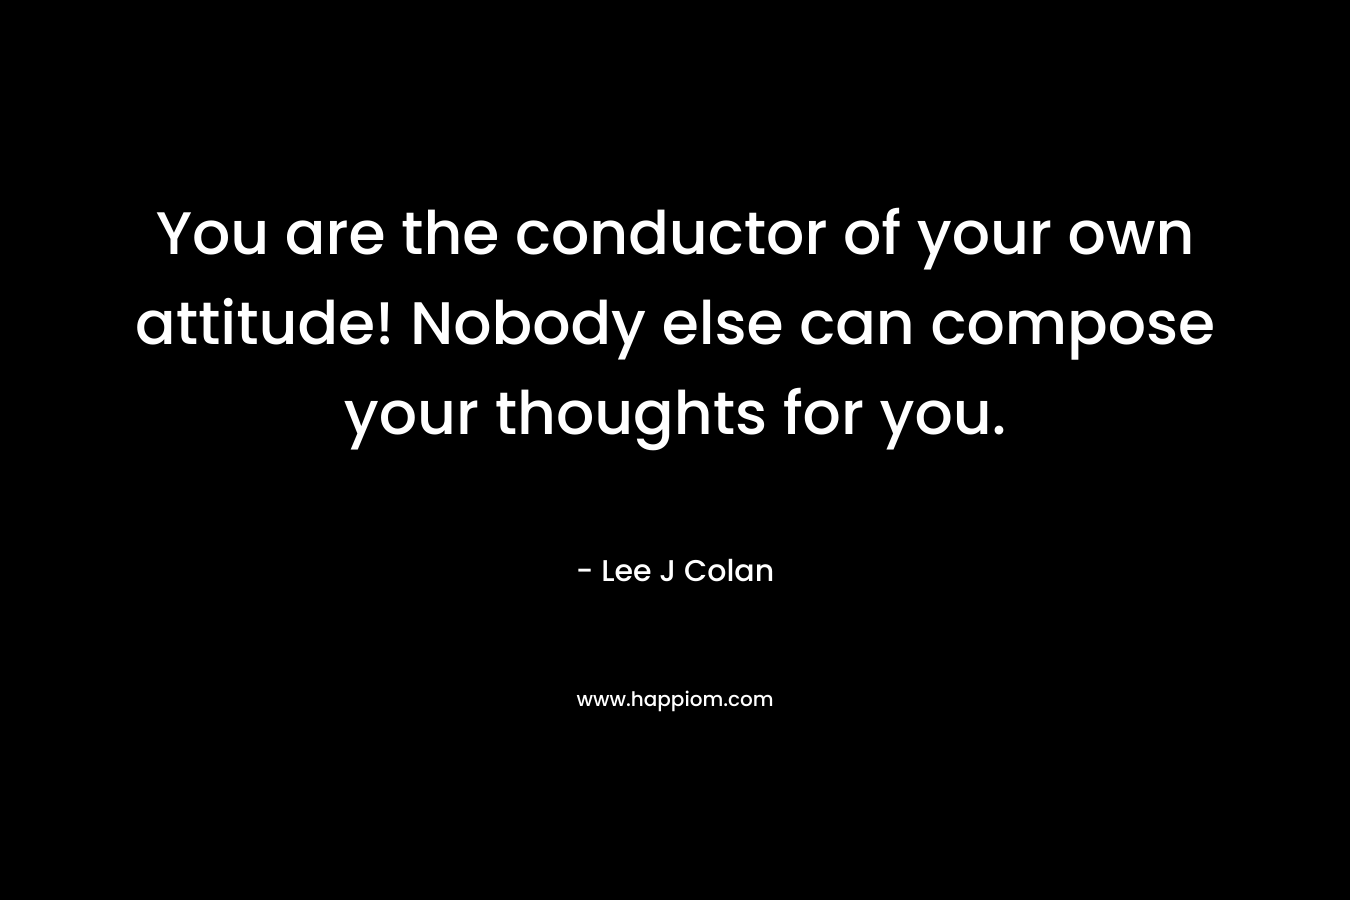 You are the conductor of your own attitude! Nobody else can compose your thoughts for you. – Lee J Colan